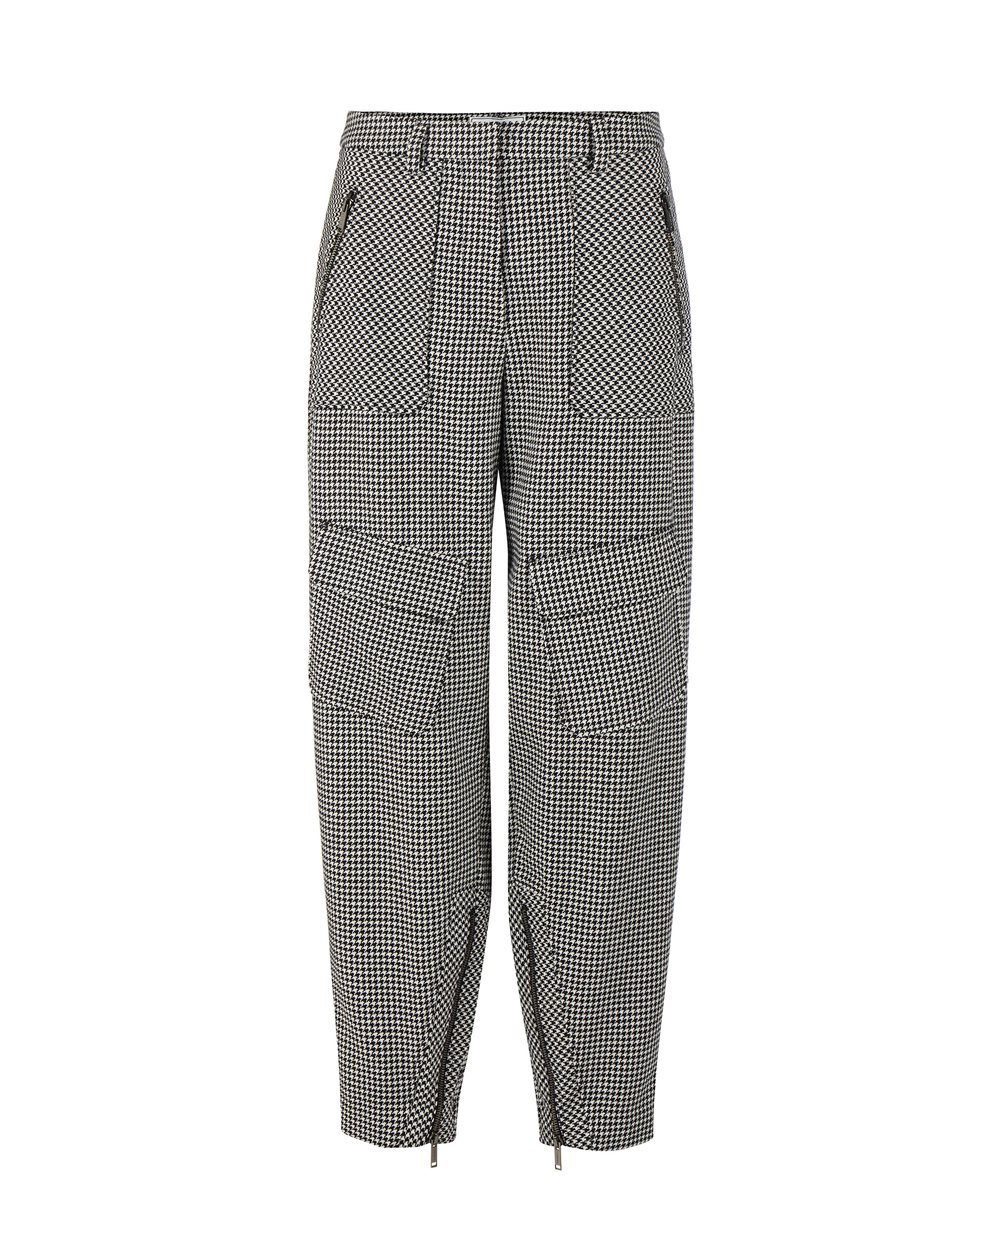 Cargo pants with pied de poule pattern - Clothing | Iceberg - Official Website